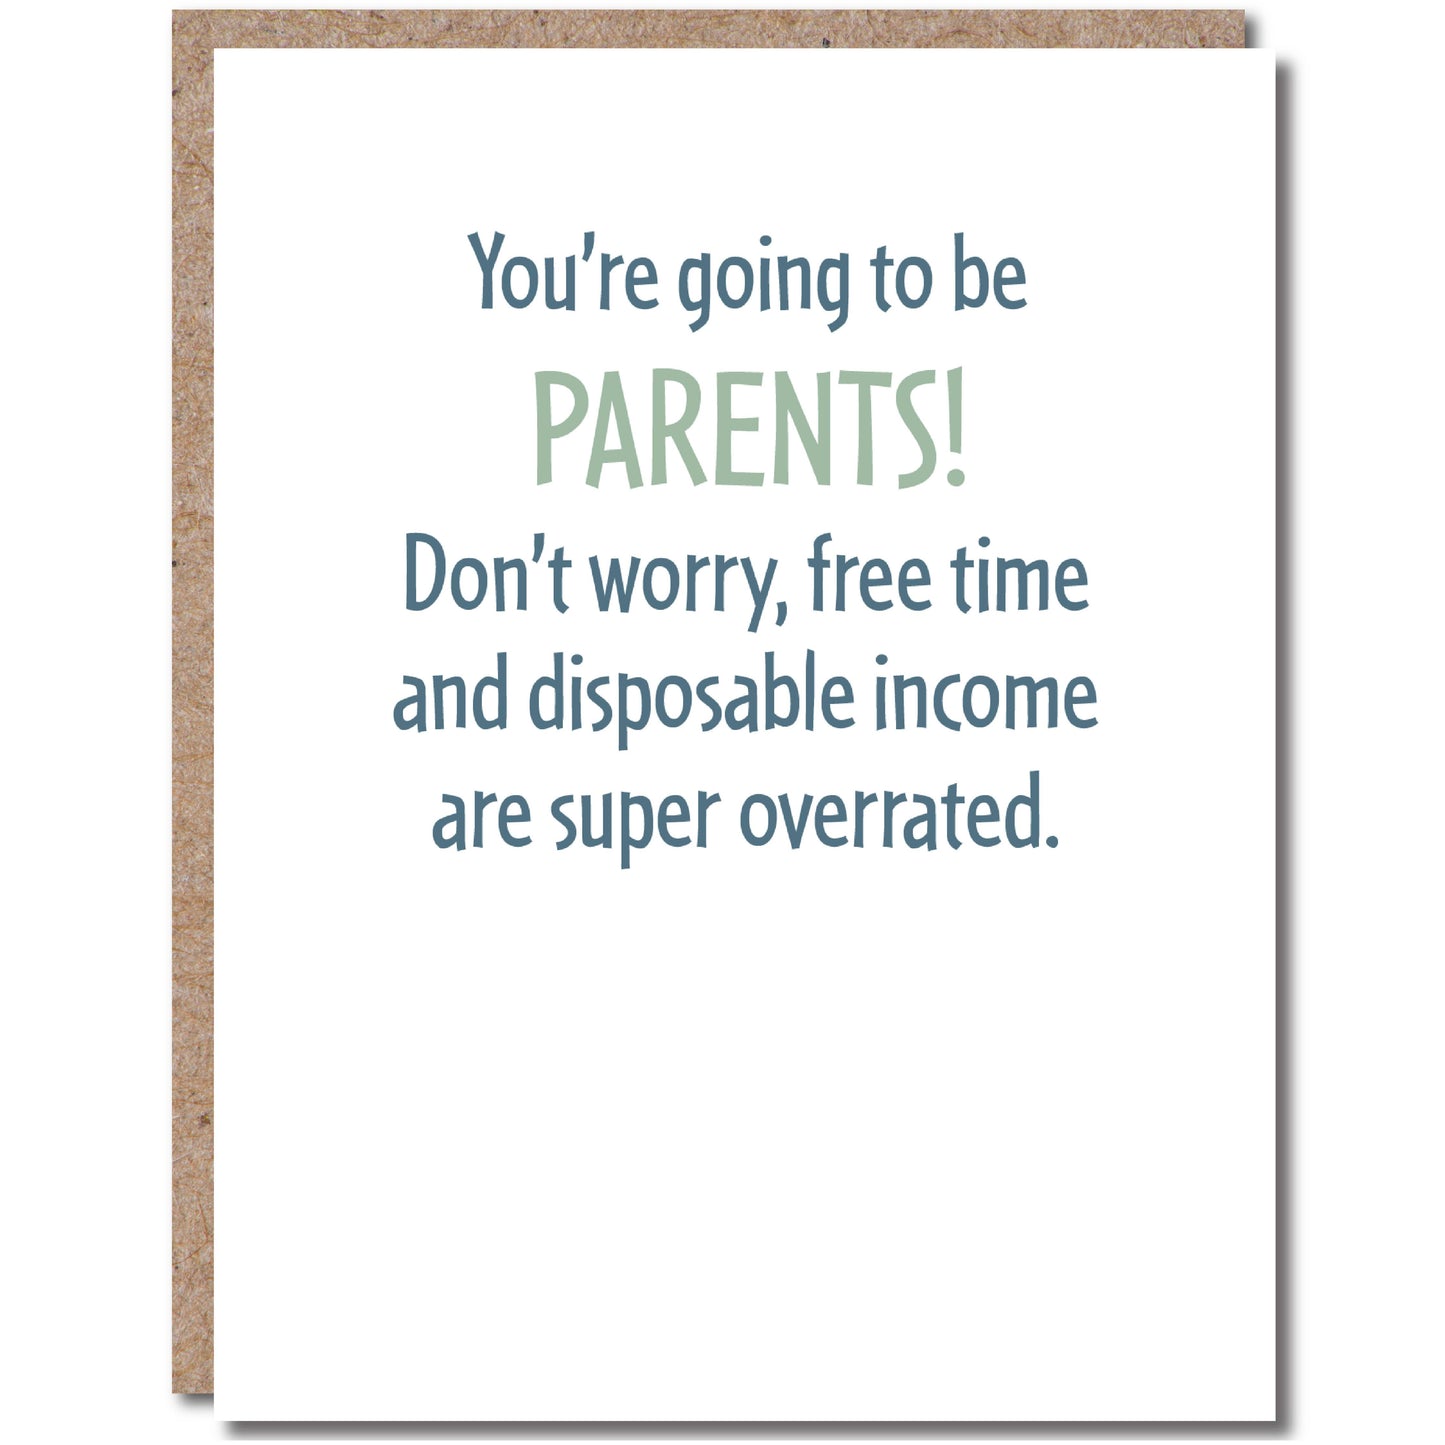 Greeting Card Parents! Overrated